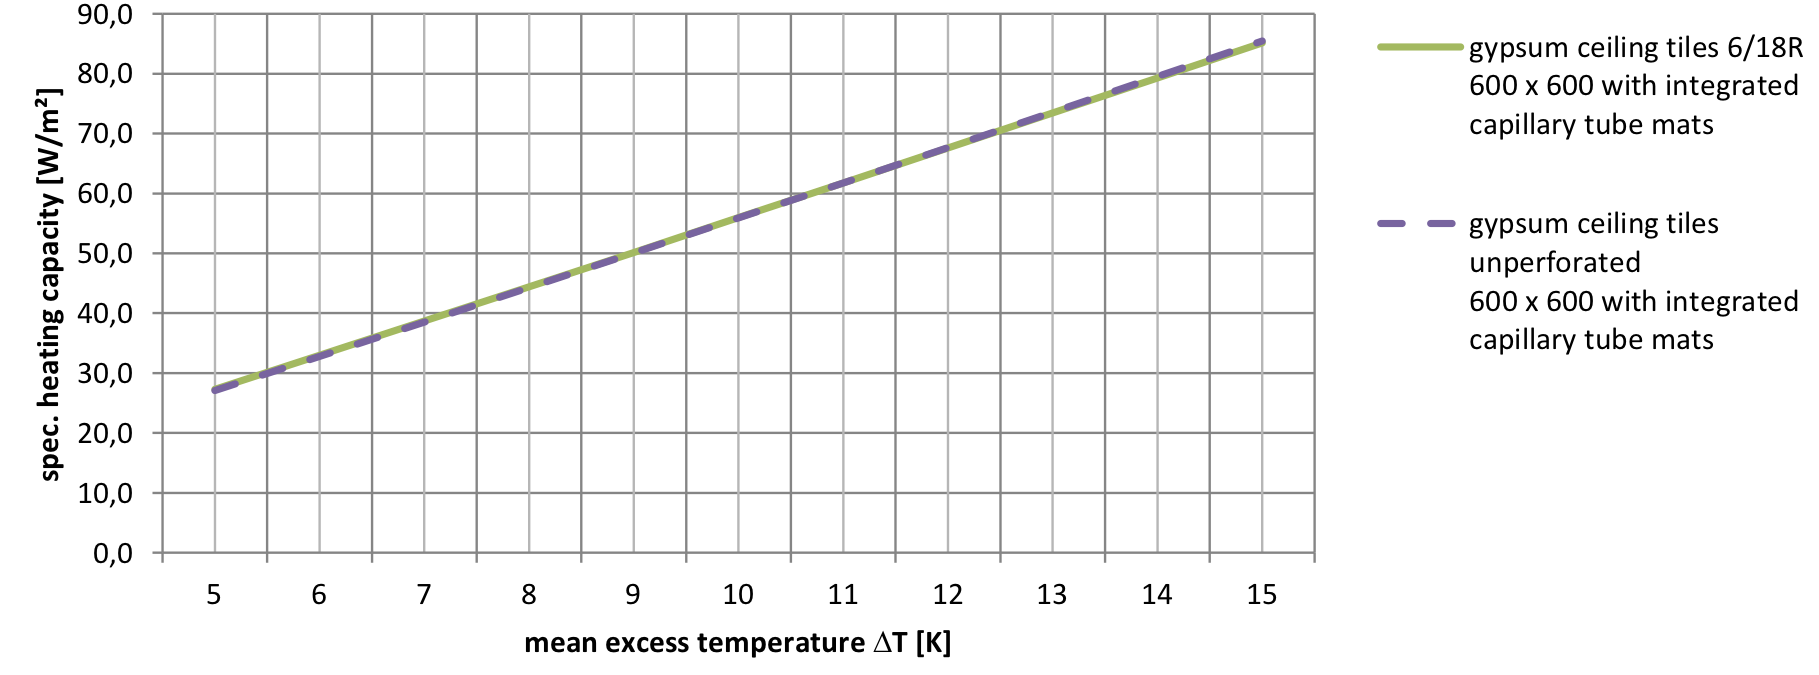 SPECIFIC COOLING CAPACITY ACCORDING TO DIN EN 14240 / 14037